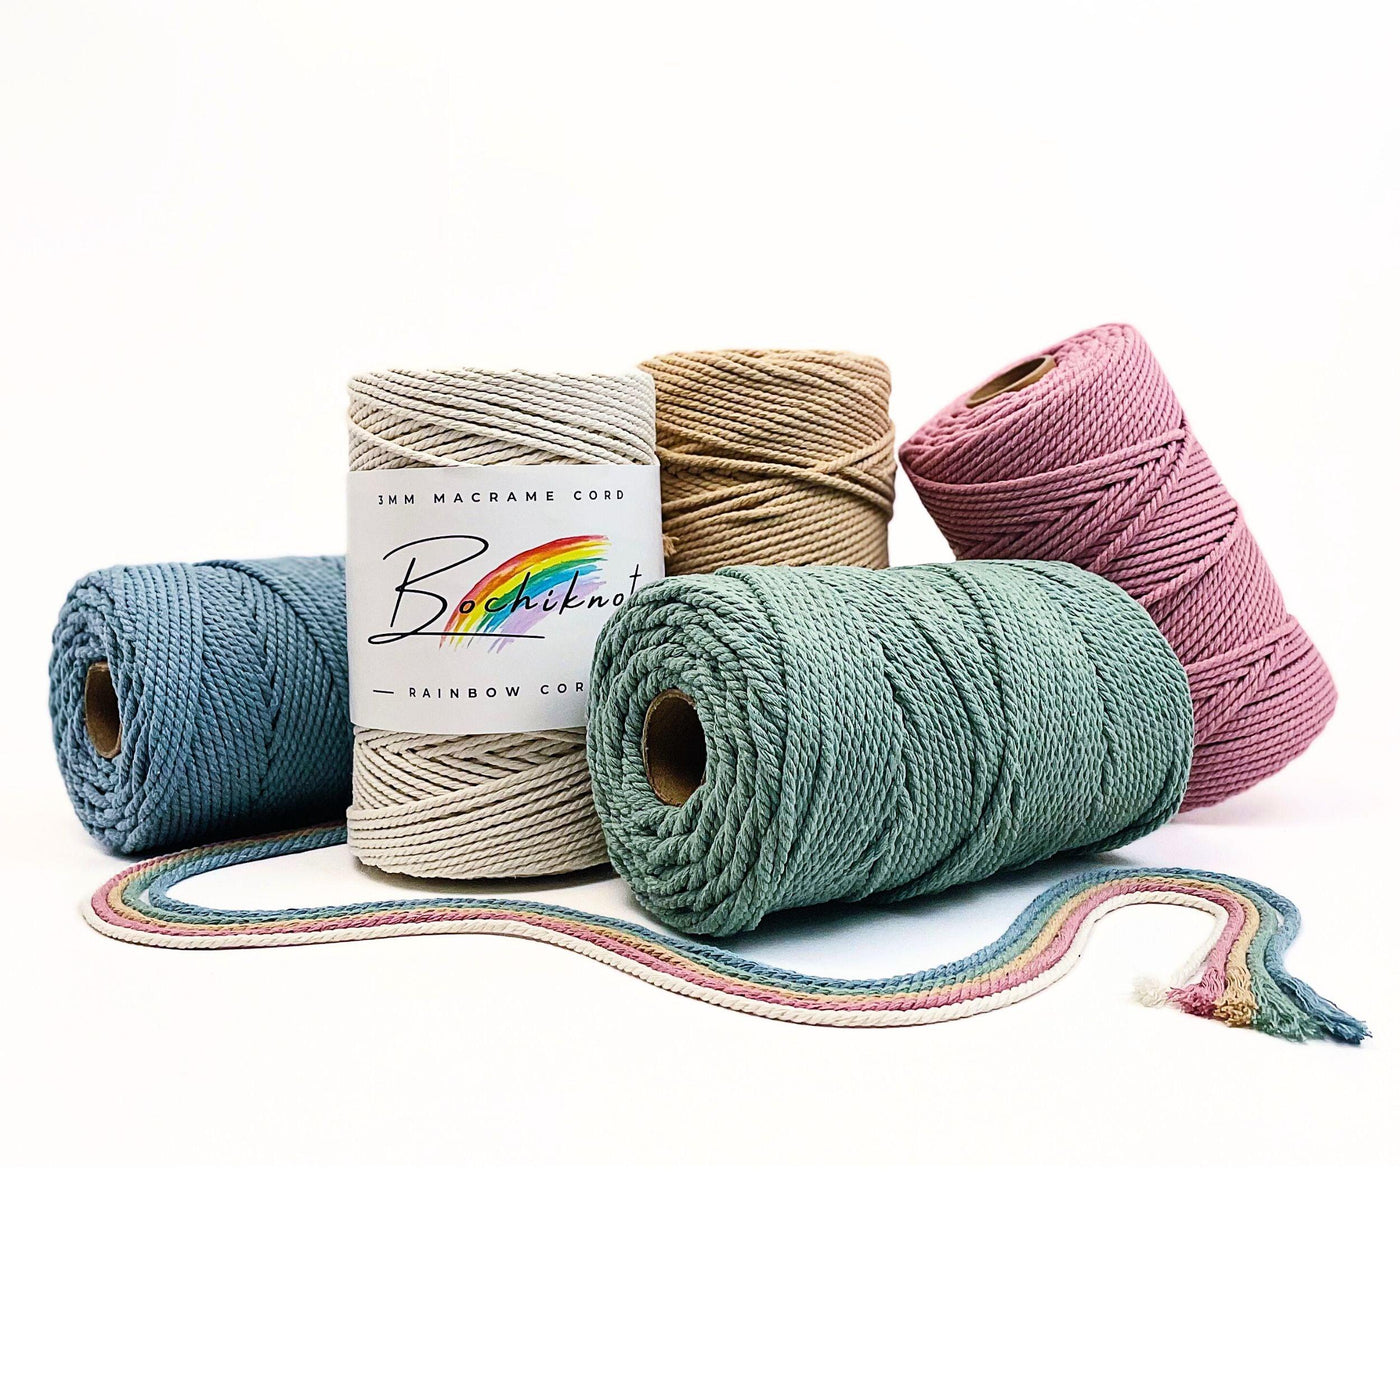 RAINBOW 3mm 3ply Twist Recycled Cotton Cord/Rope (310 yds) - Bochiknot